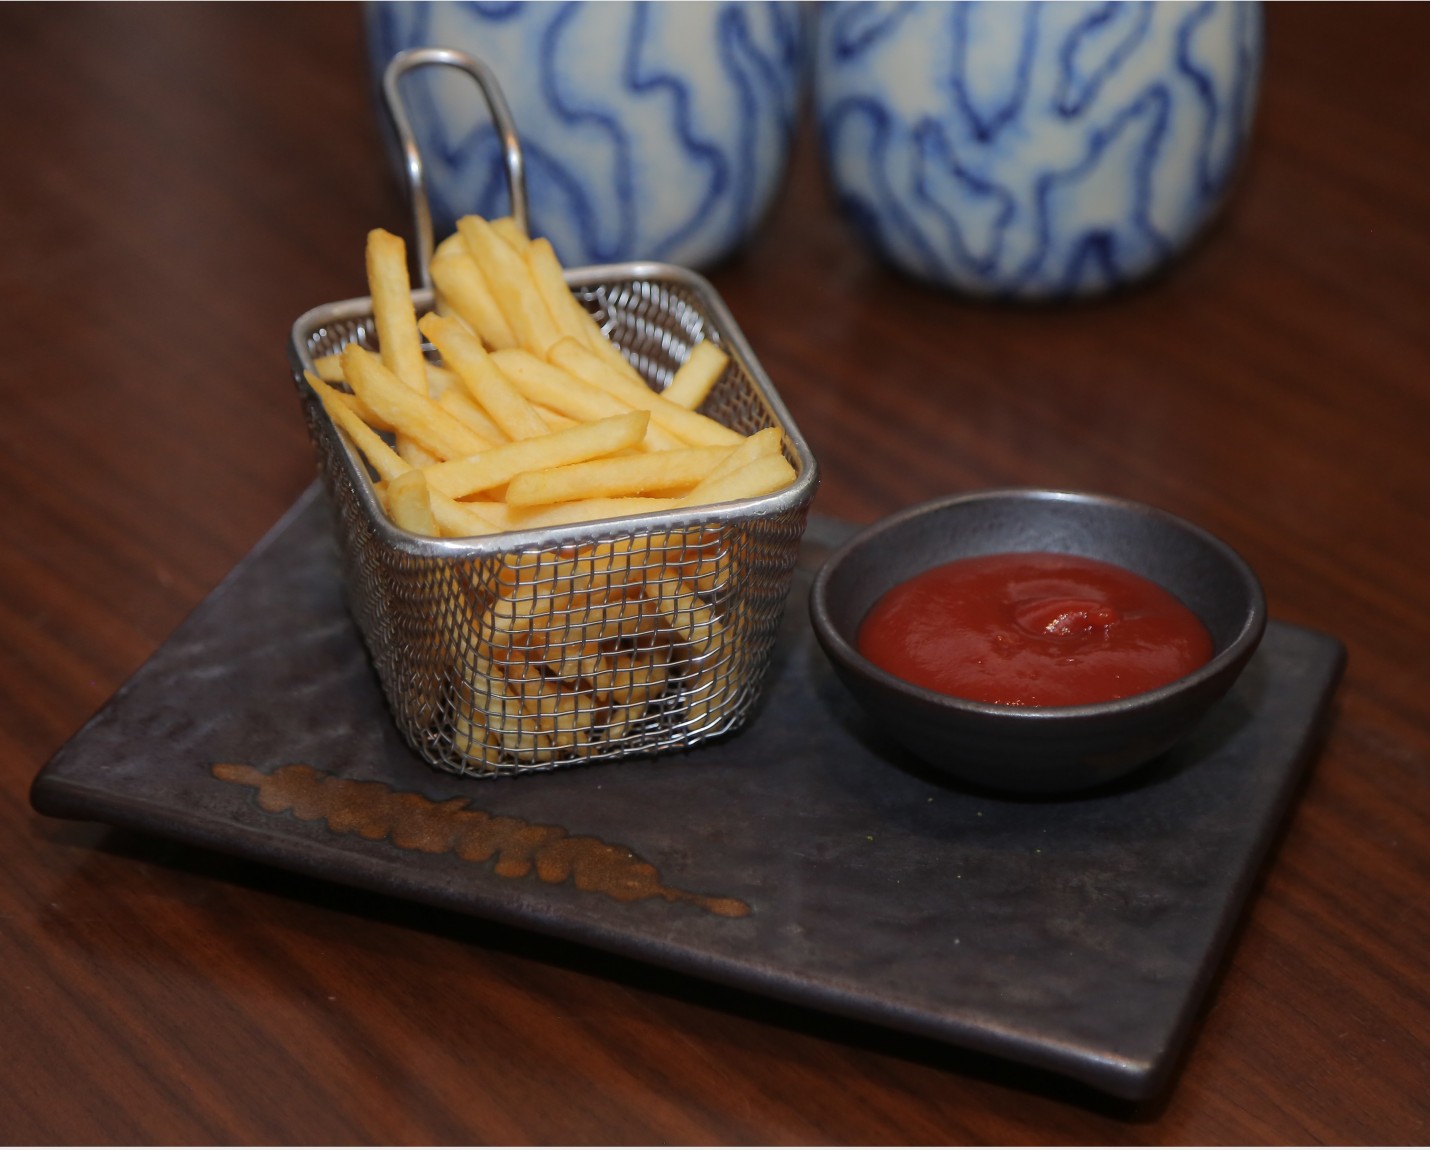 <h6 class='prettyPhoto-title'>FRENCH FRIES</h6>